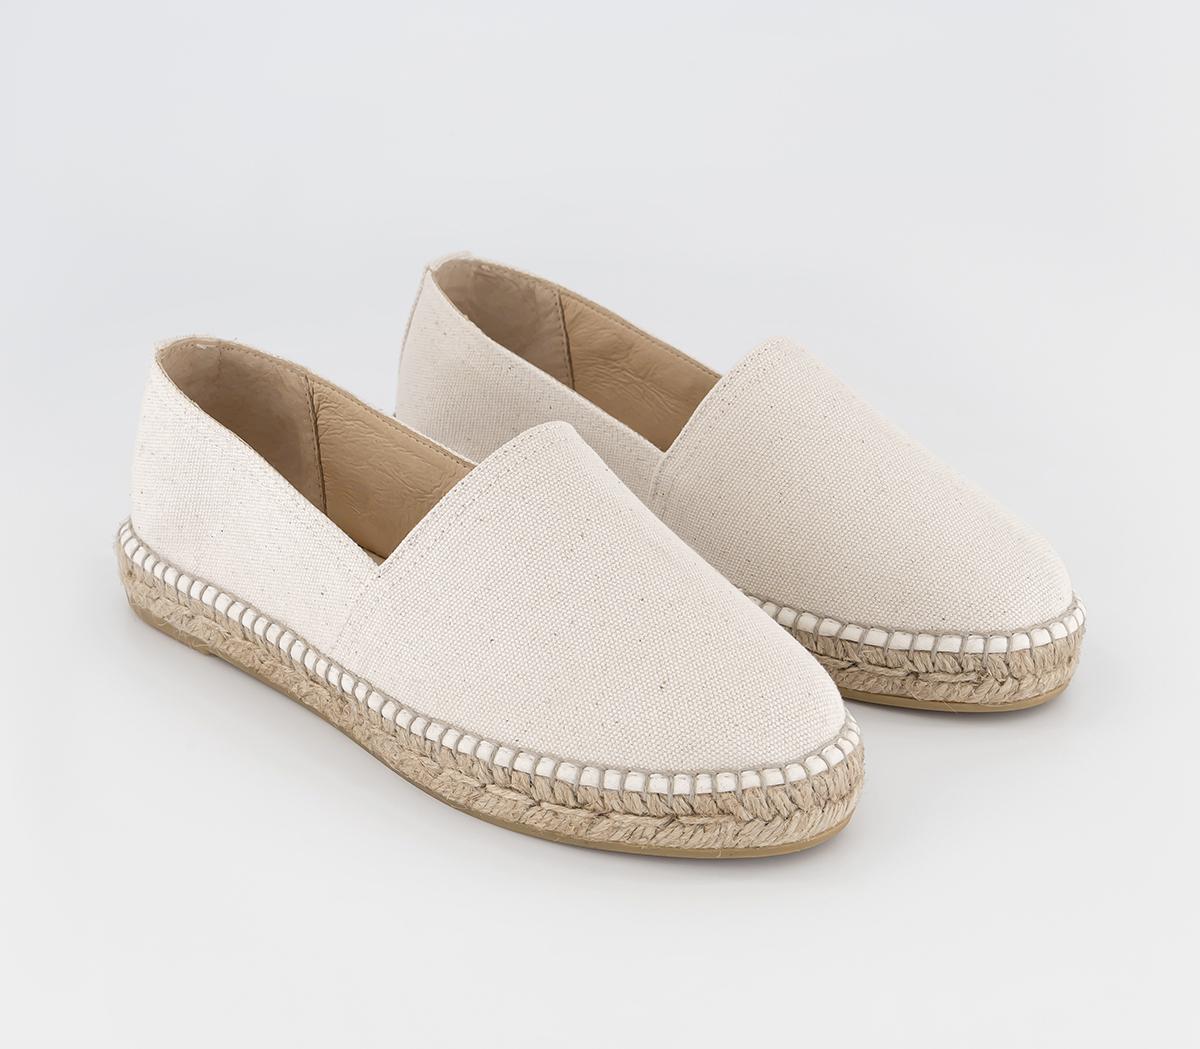 Gaimo For Office Womens Camping Slip On Espadrilles Cream Canvas Natural, 4